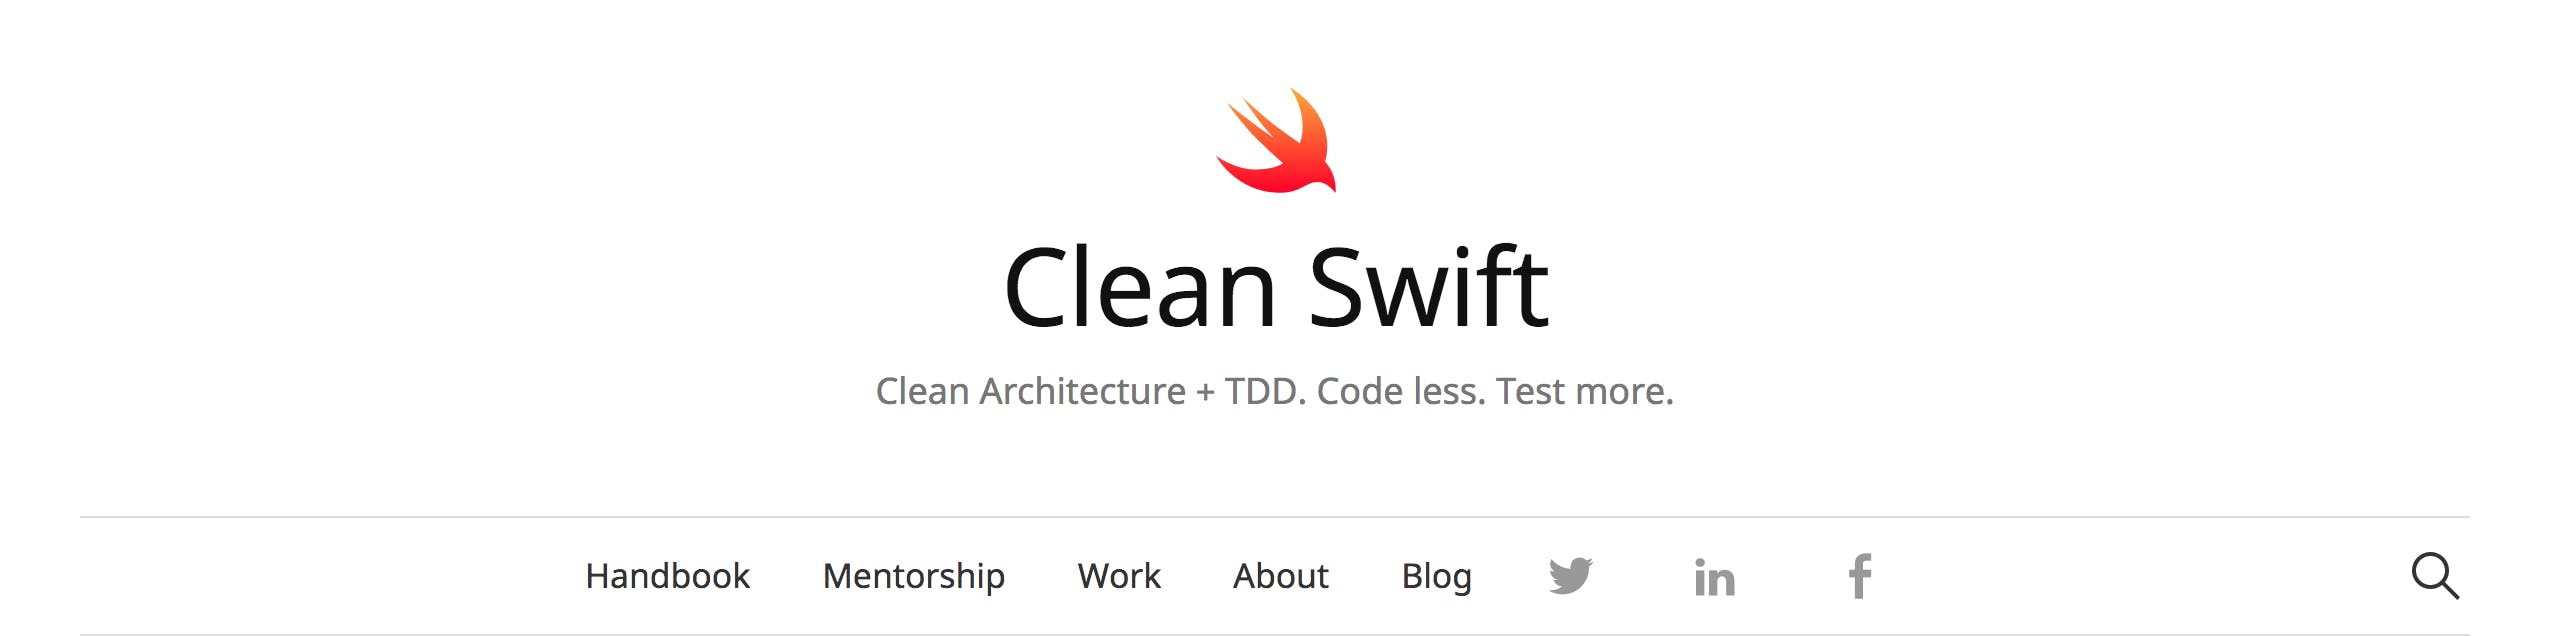 featured image - Introducing Clean Swift Architecture (VIP)